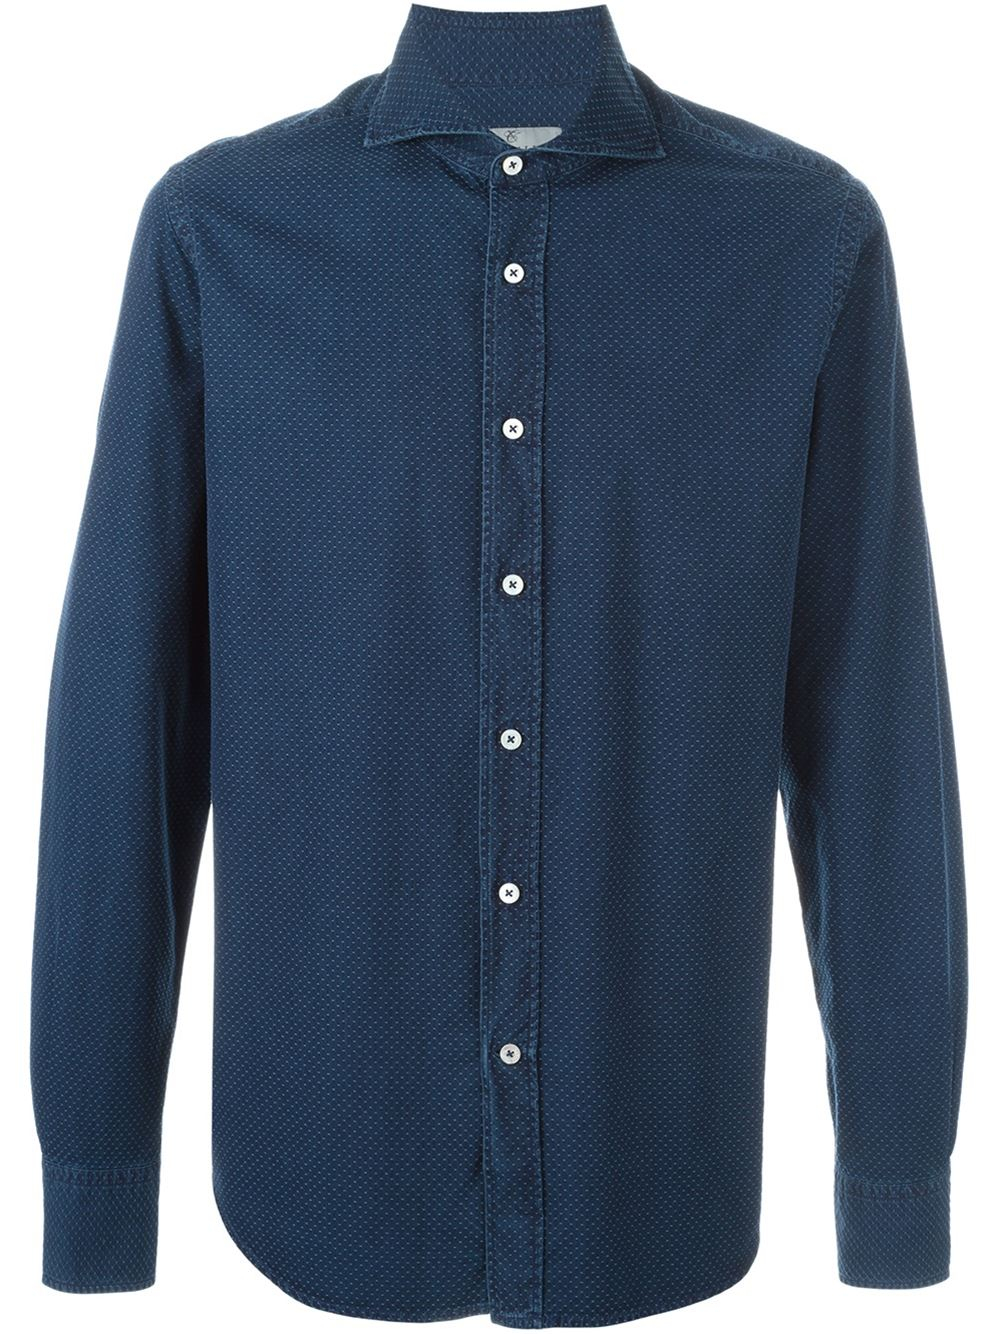 Lyst - Canali Dotted Shirt in Blue for Men